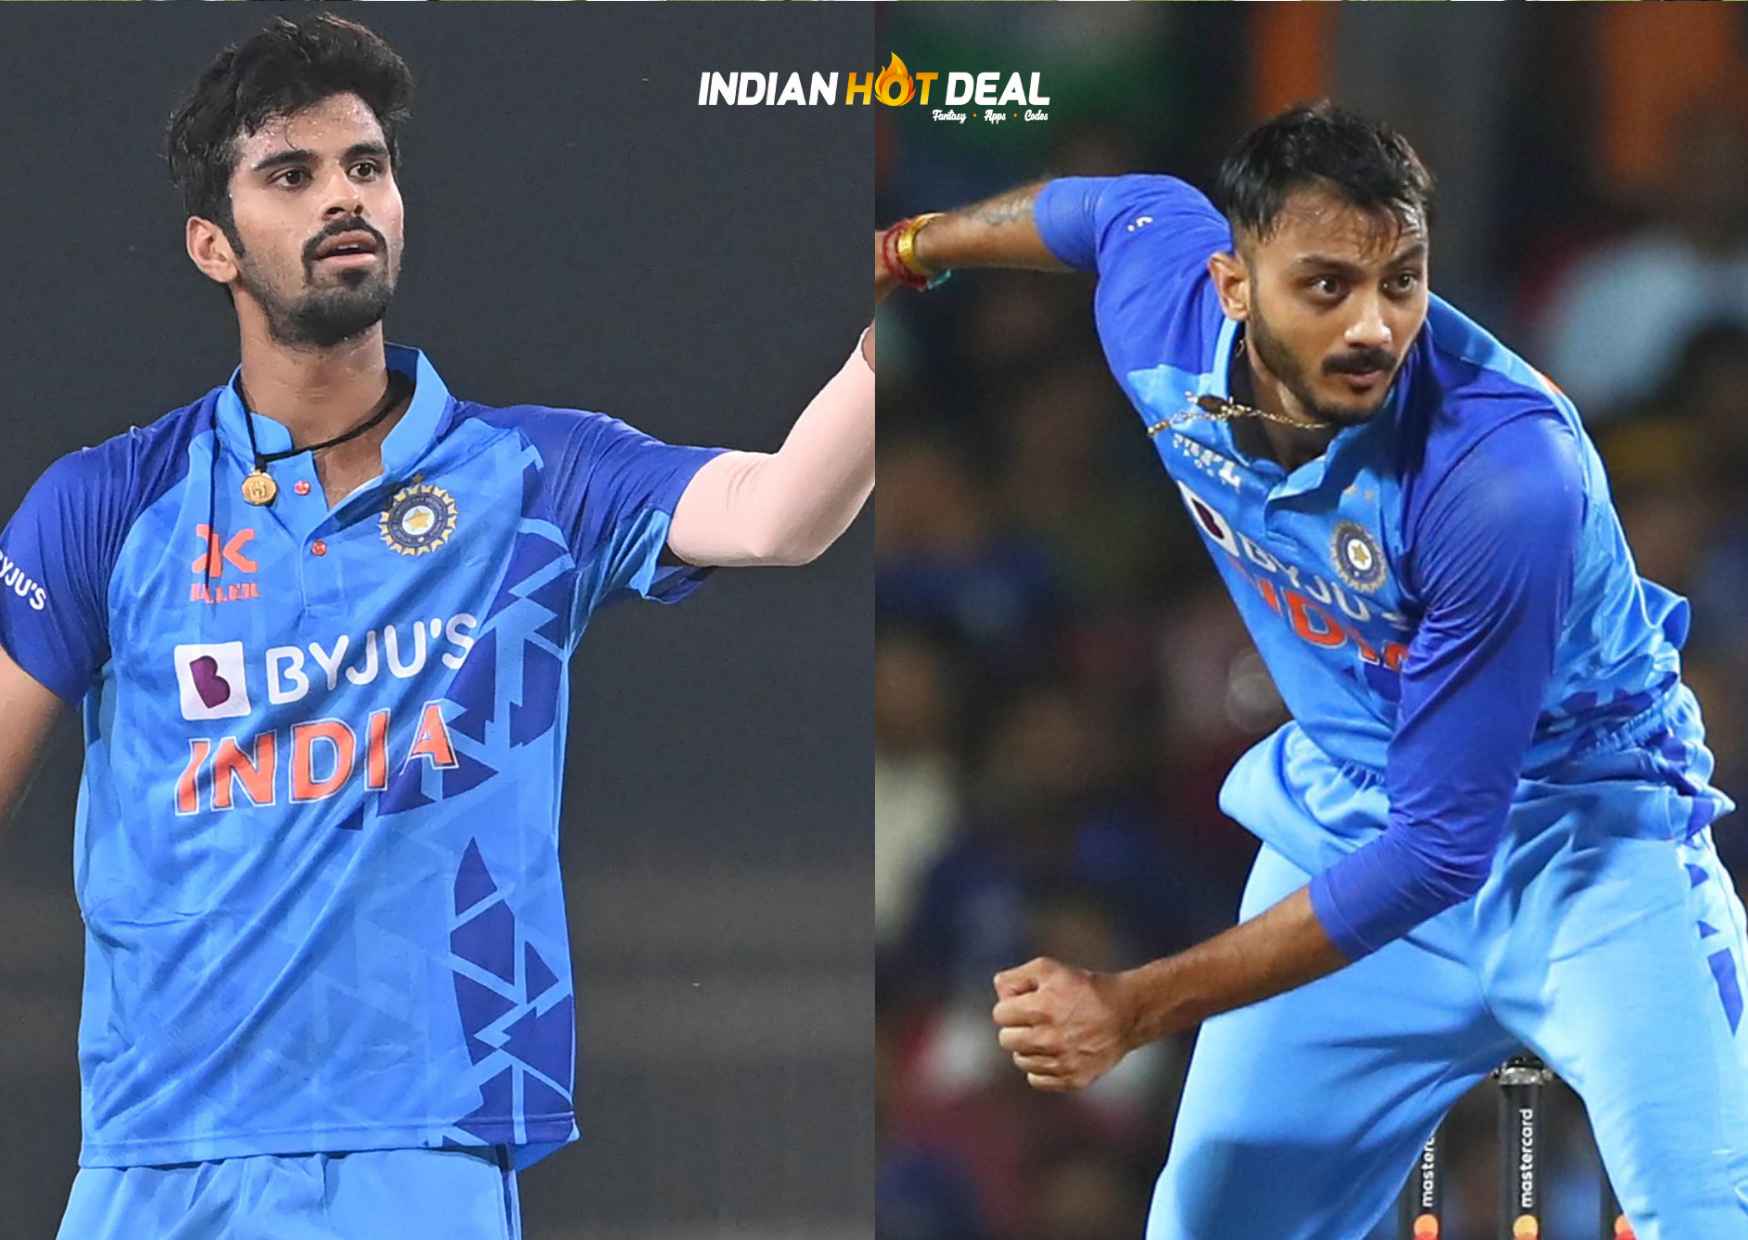 Washington Sundar replaces Axar Patel in India's Asia Cup Final squad